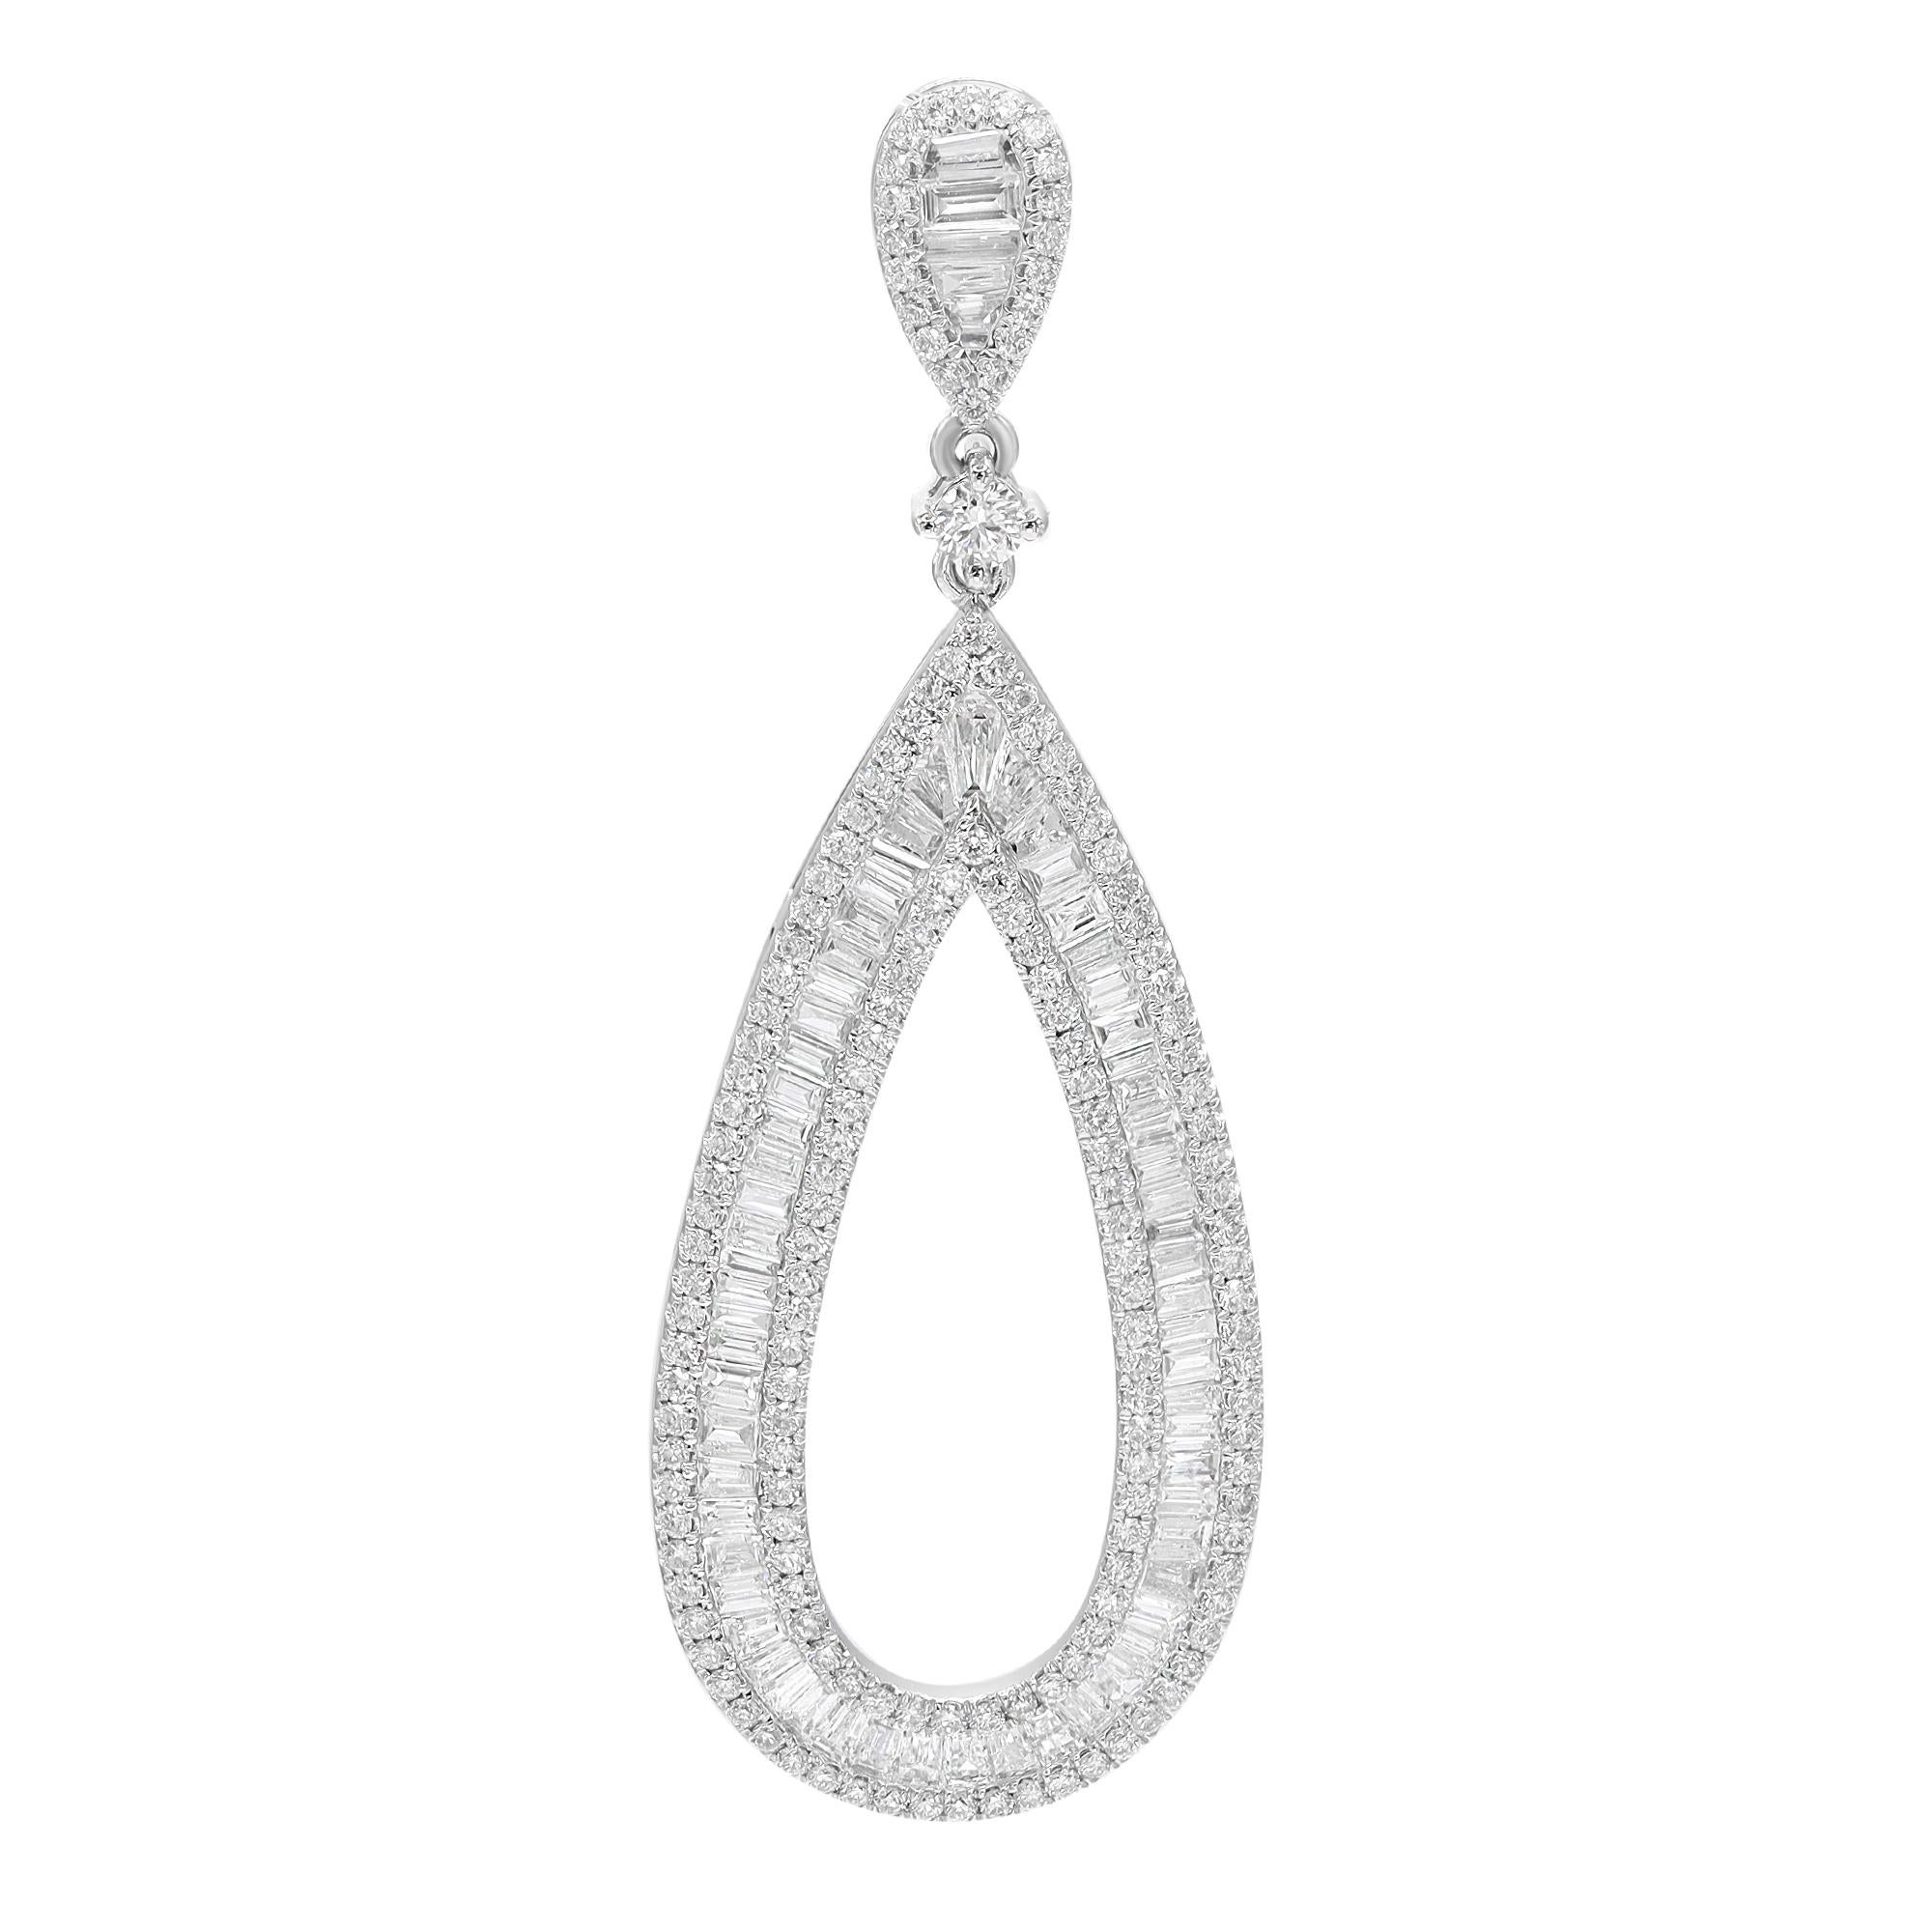 These exemplary earrings mounted in 18k white gold add a touch of elegance and sophistication to any outfit. Featuring, channel set baguette cut and pave set round cut diamonds weighing 3.31 carats. Diamond quality: color G-H and clarity VS-SI. A